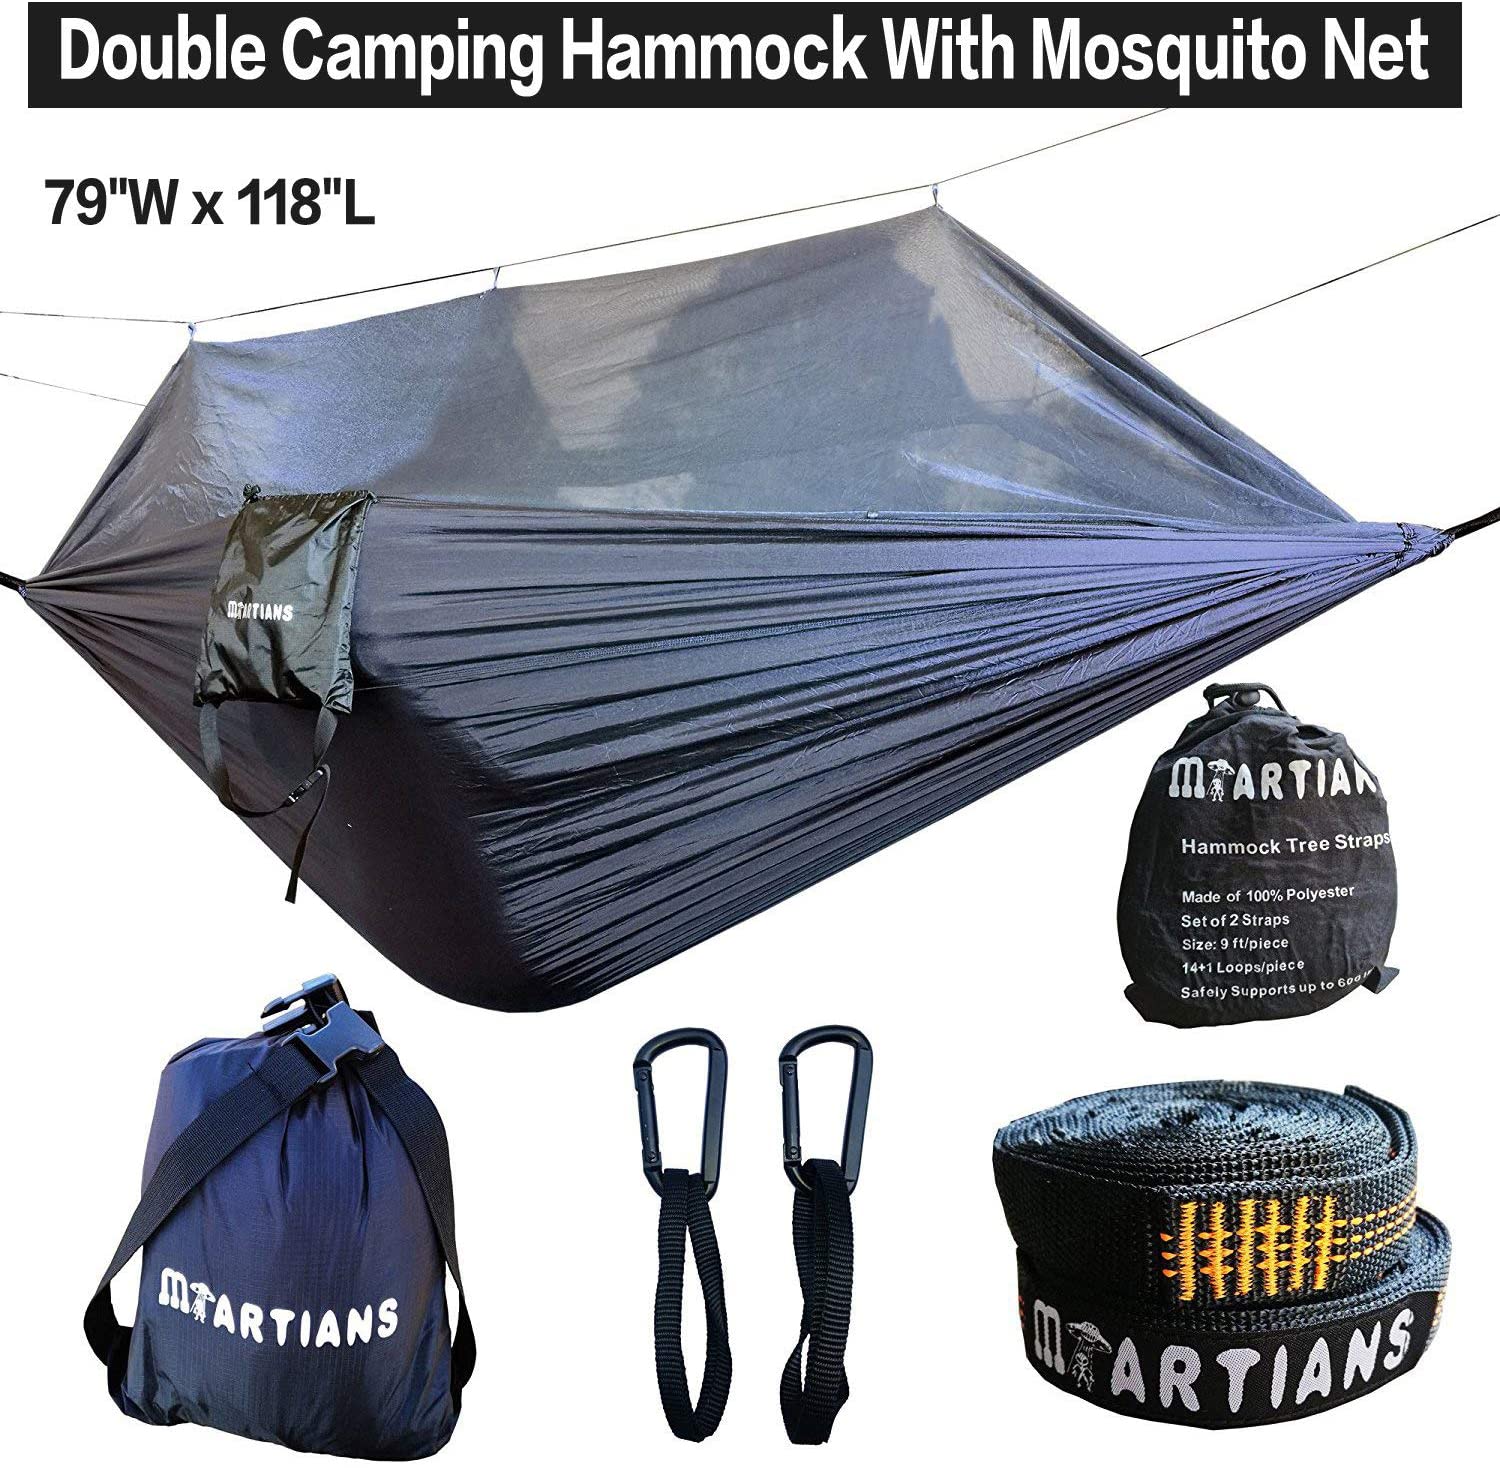 Camping Hammock with Mosquito Net Largest 118"X79" Extra Strong Ripstop Nylon Camping Hammock Reversible, Compact